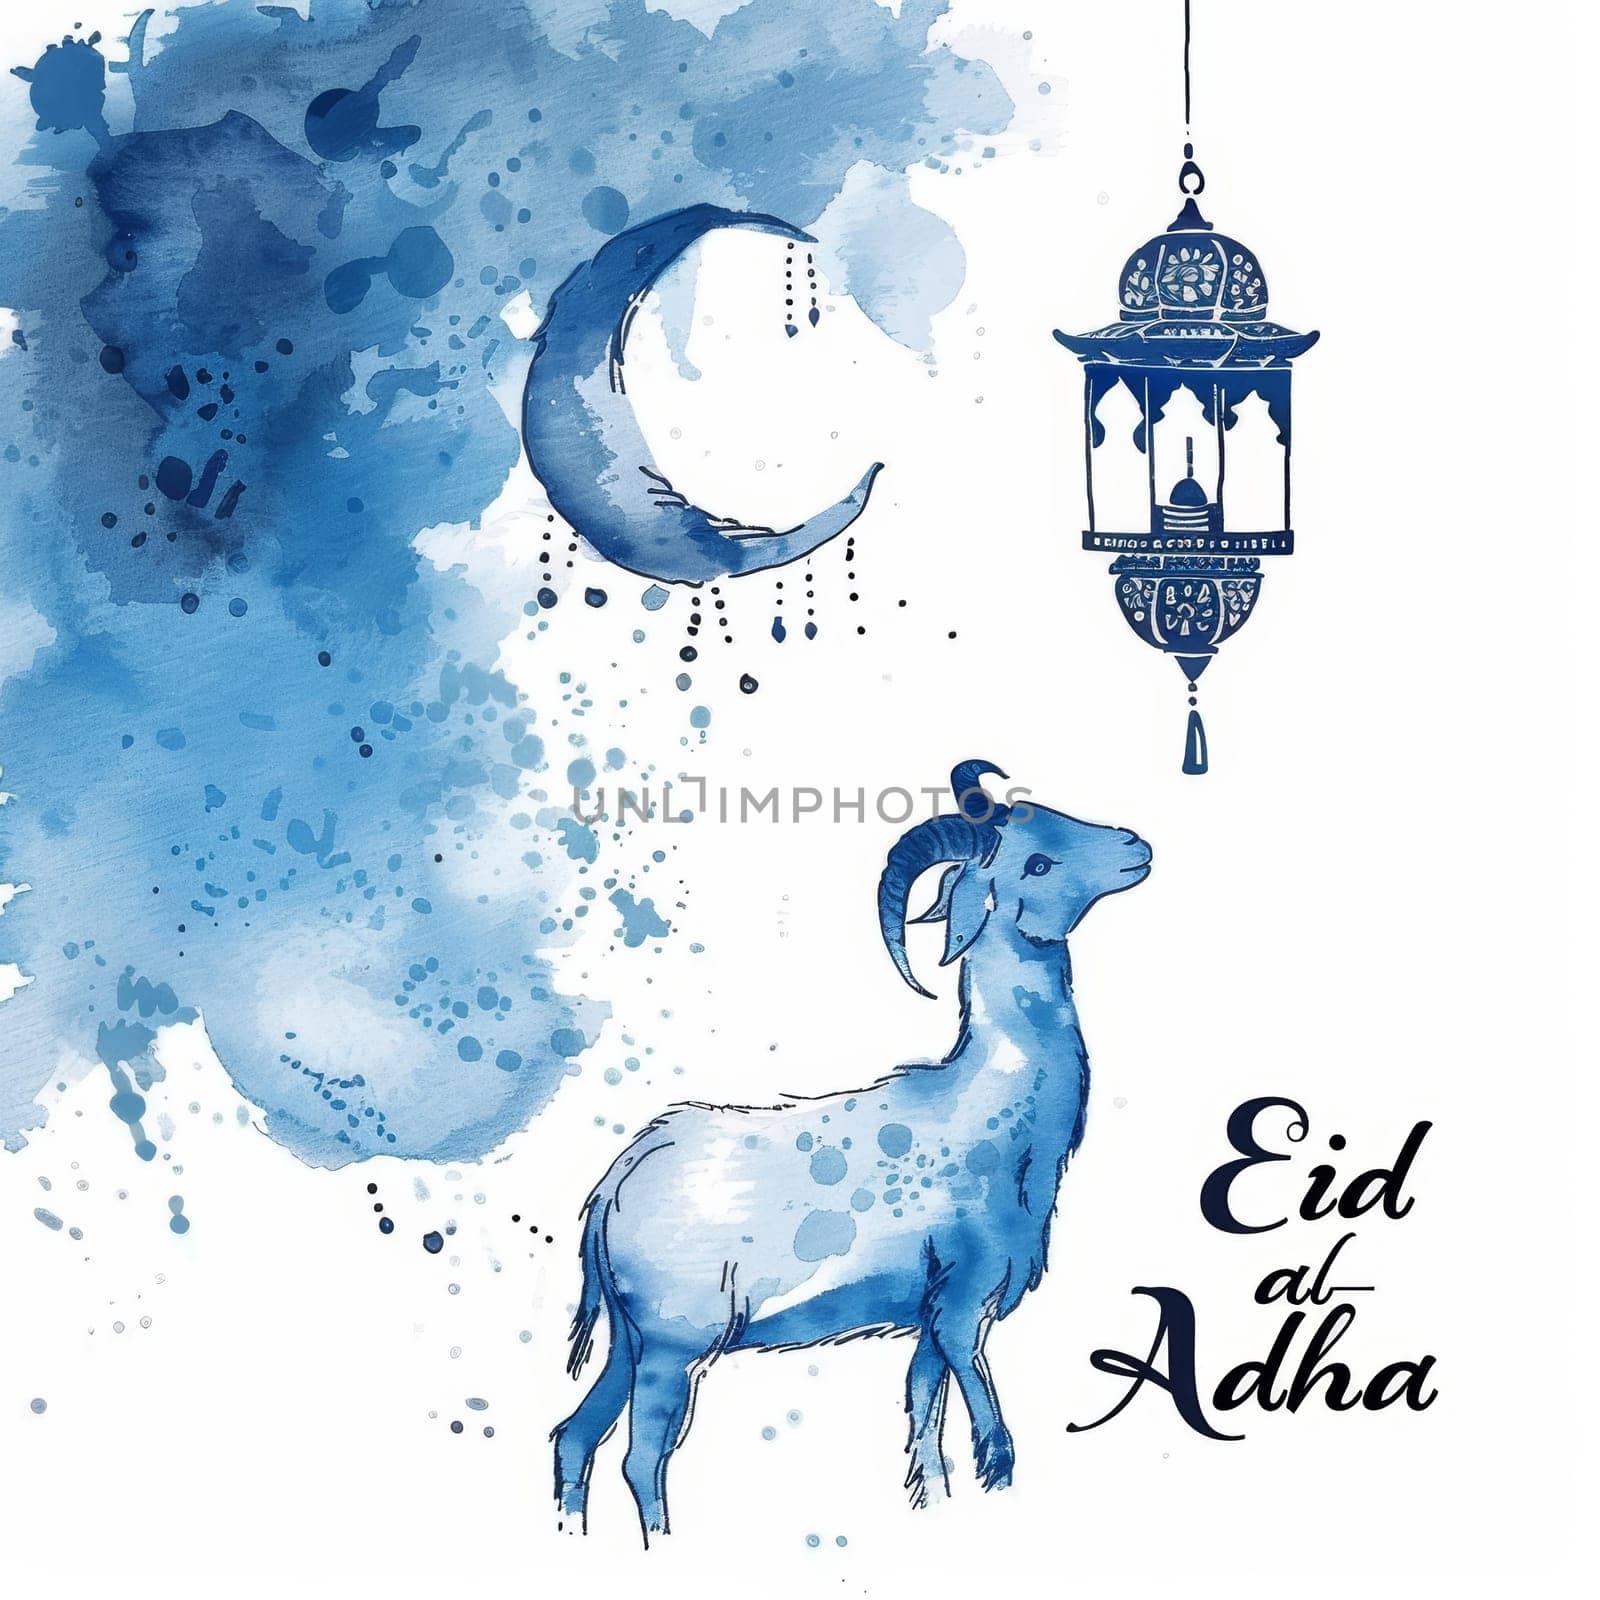 An artistic Eid al-Adha illustration in blue watercolor with a goat and hanging lantern, capturing the essence of the celebration